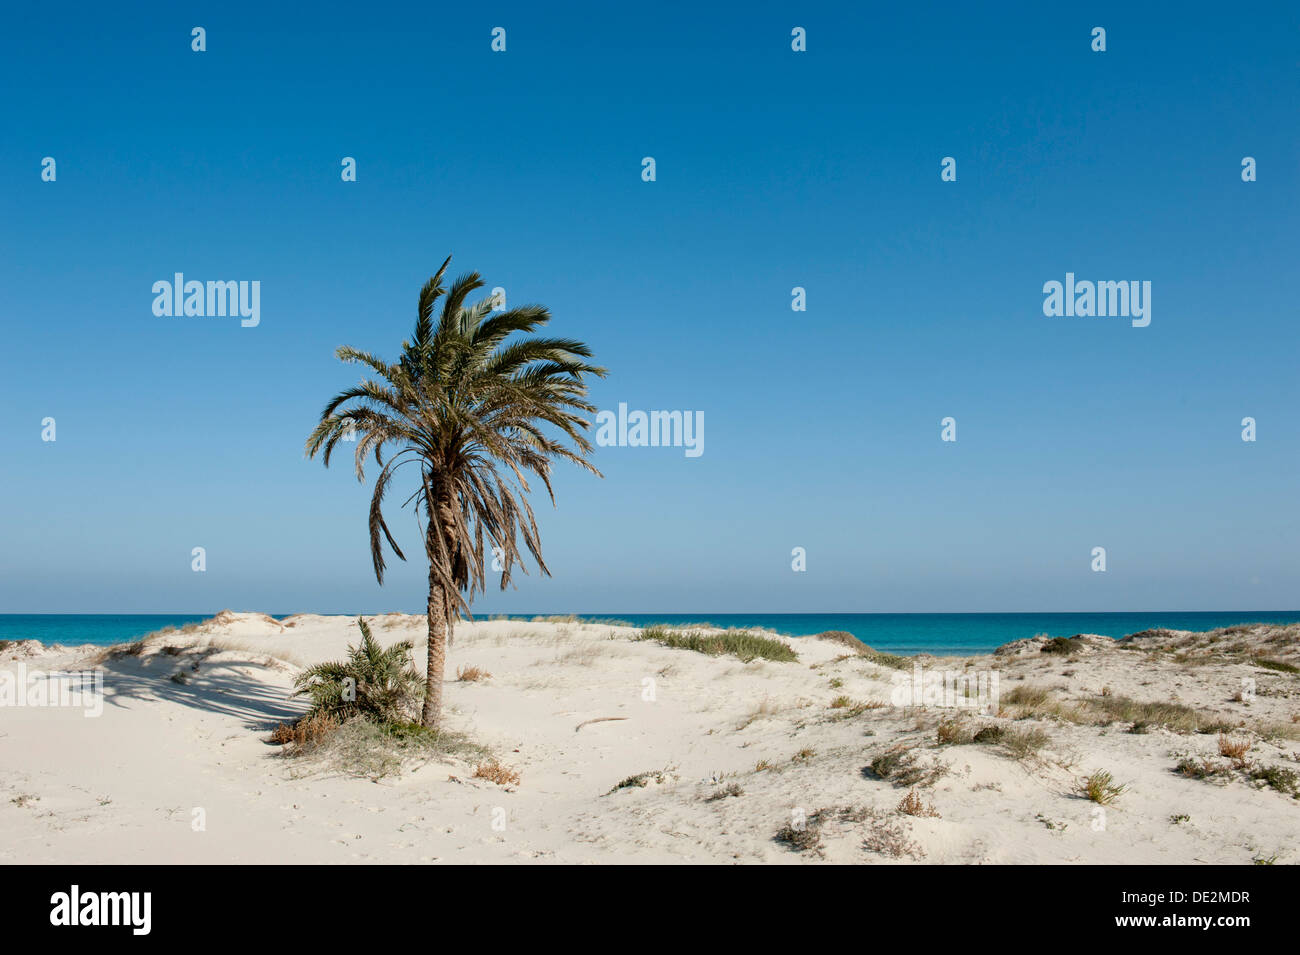 Deserted beach with palms, white sand, island of Djerba, Tunisia, Maghreb, North Africa, Africa Stock Photo